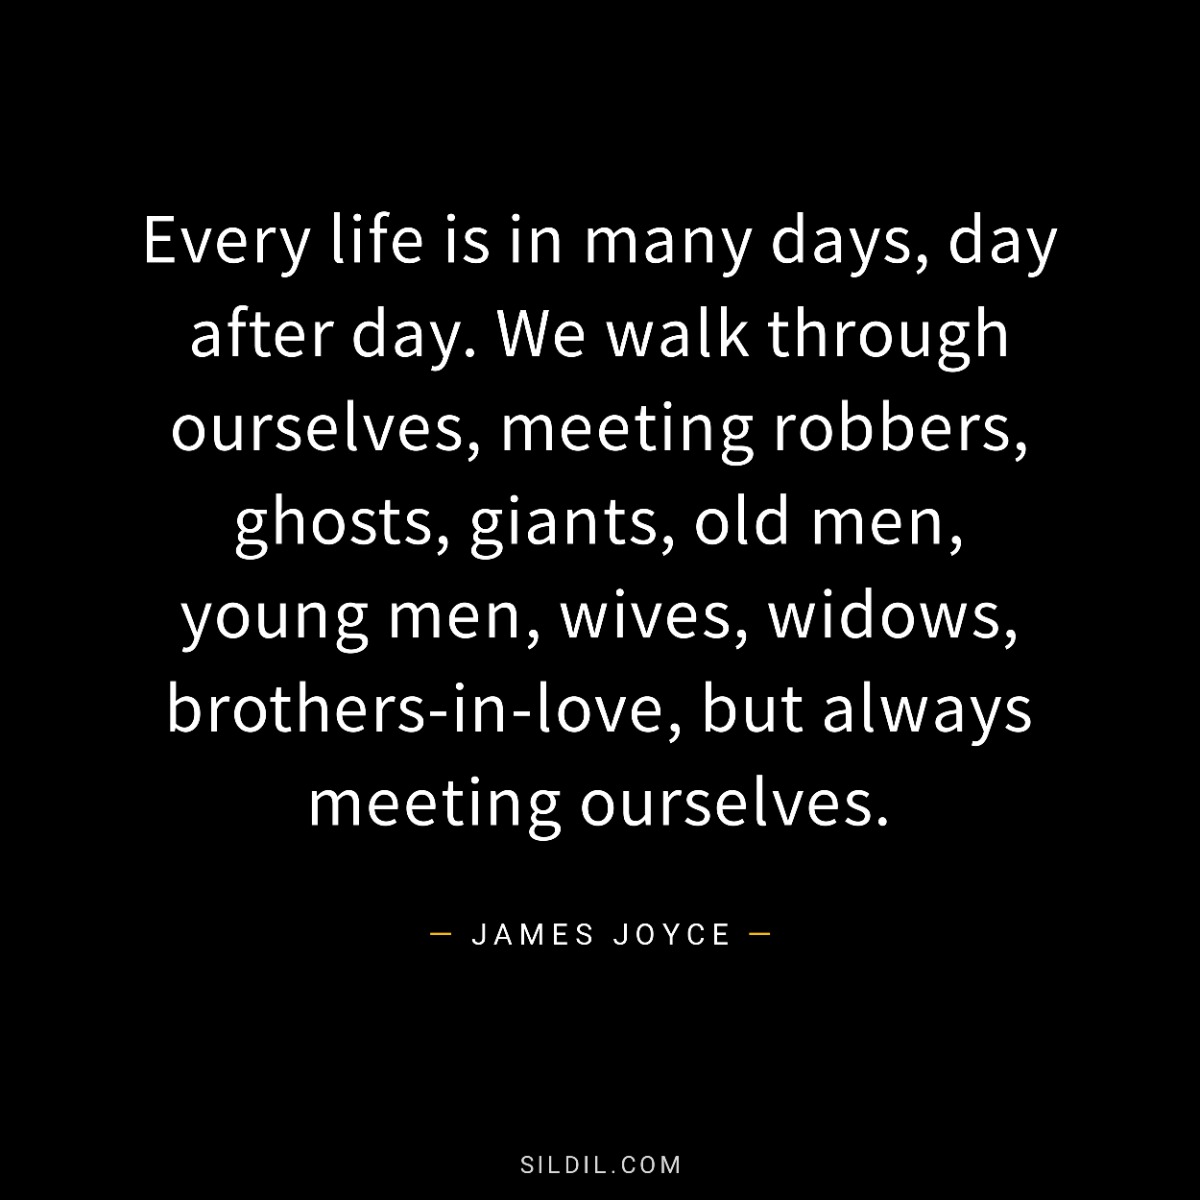 Every life is in many days, day after day. We walk through ourselves, meeting robbers, ghosts, giants, old men, young men, wives, widows, brothers-in-love, but always meeting ourselves.